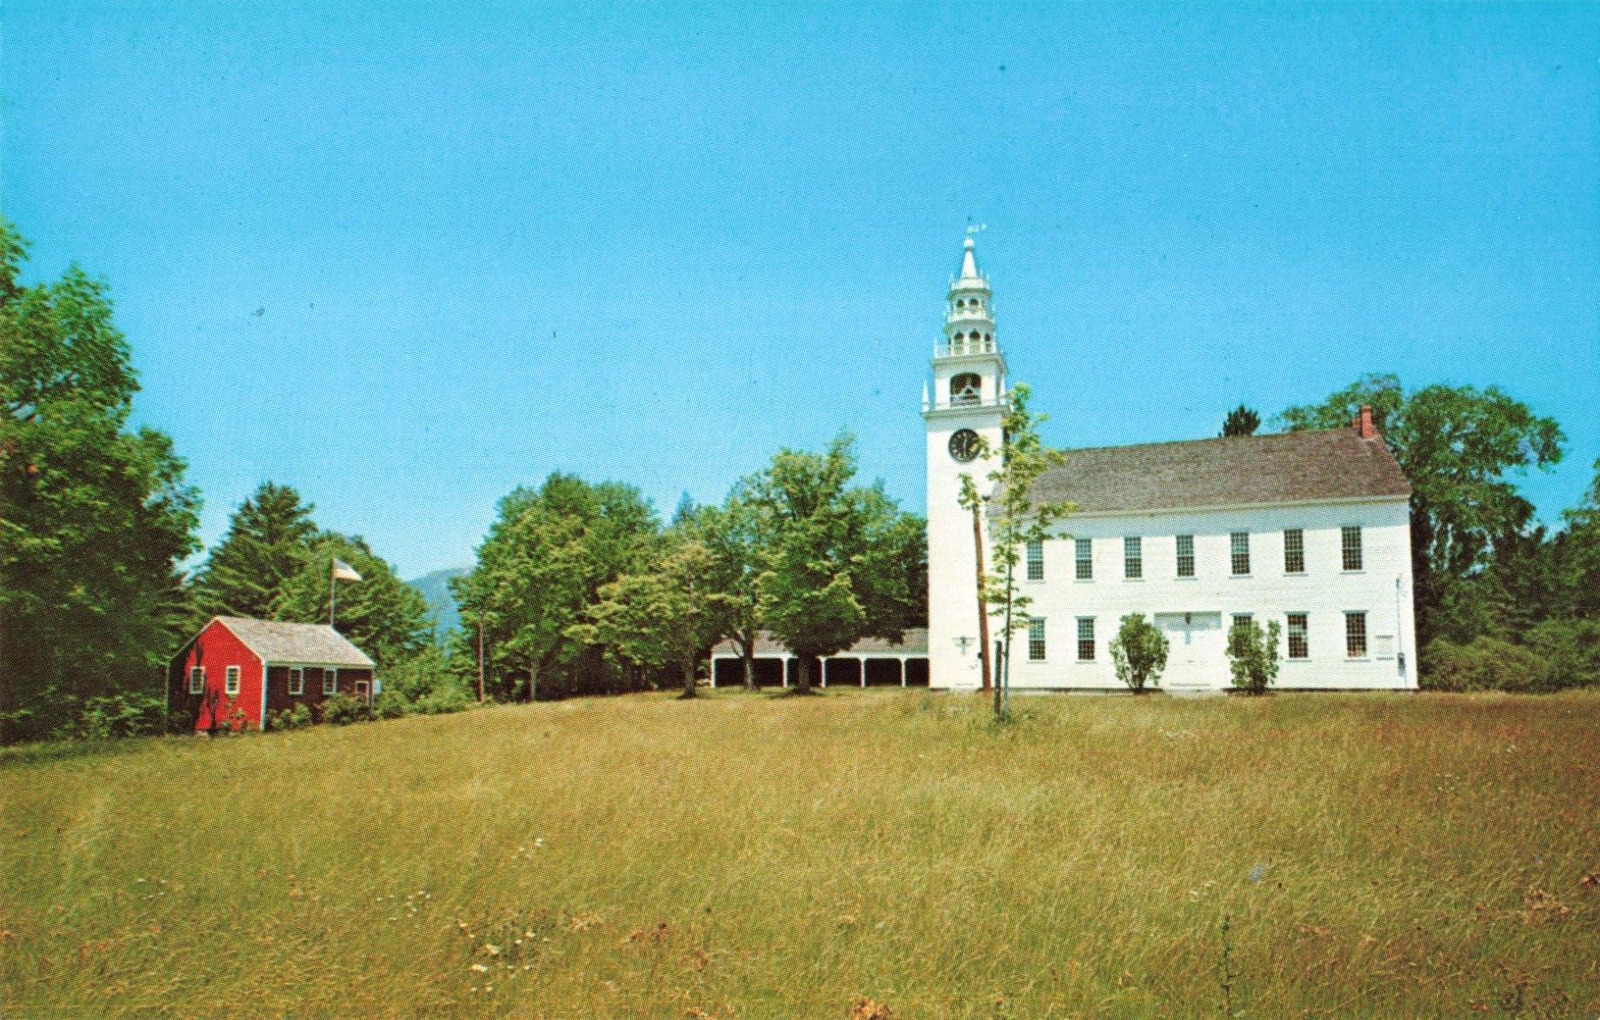 Jaffrey NH New Hampshire, Red School House, Meeting House, Vintage Postcard